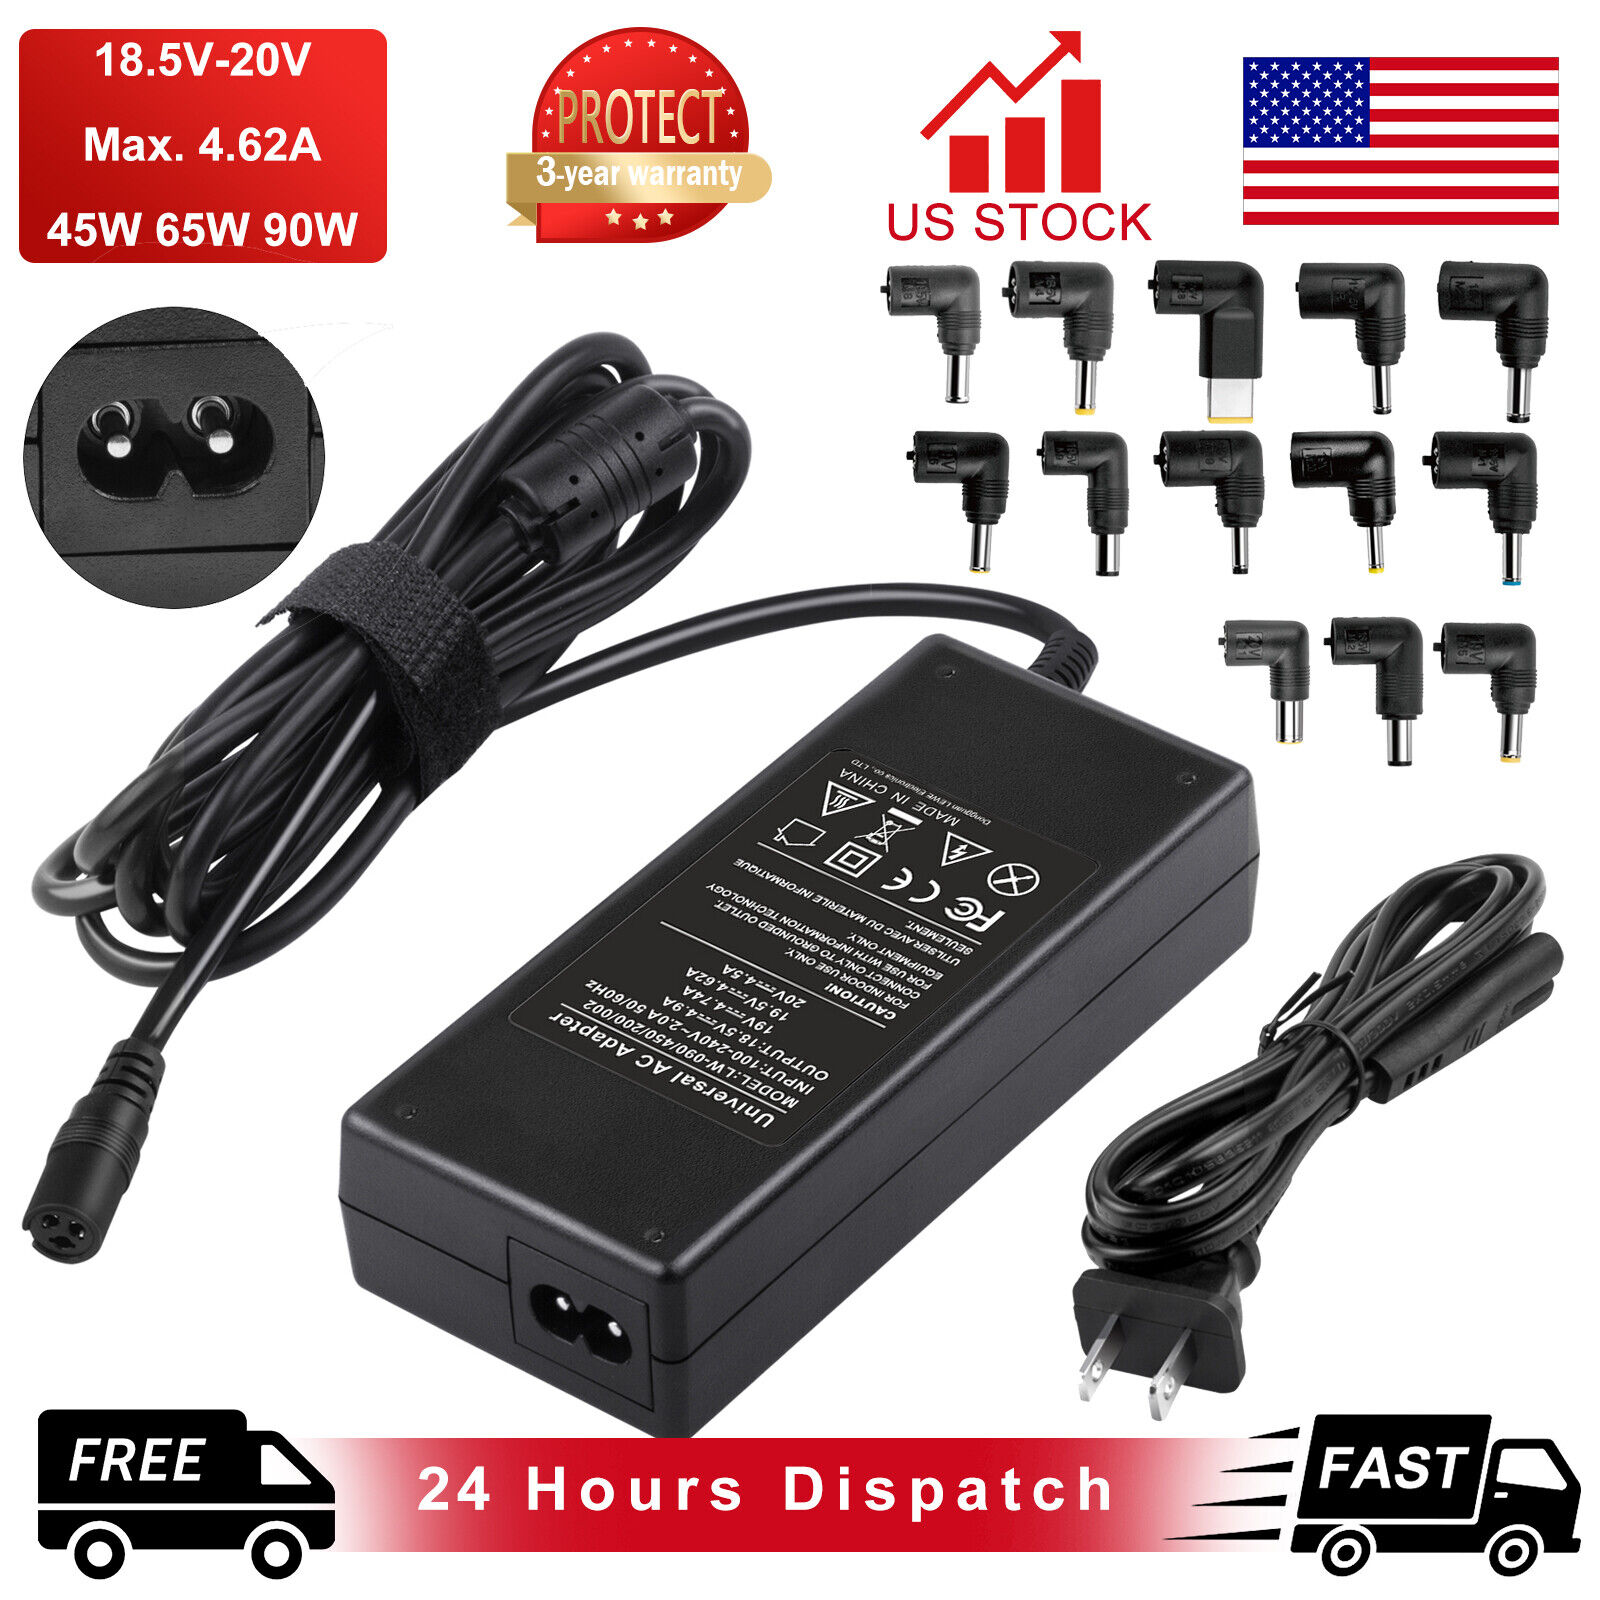 Universal 40W/45W/65W/90W AC Adapter Charger For Dell HP Acer Asus Lenovo Laptop